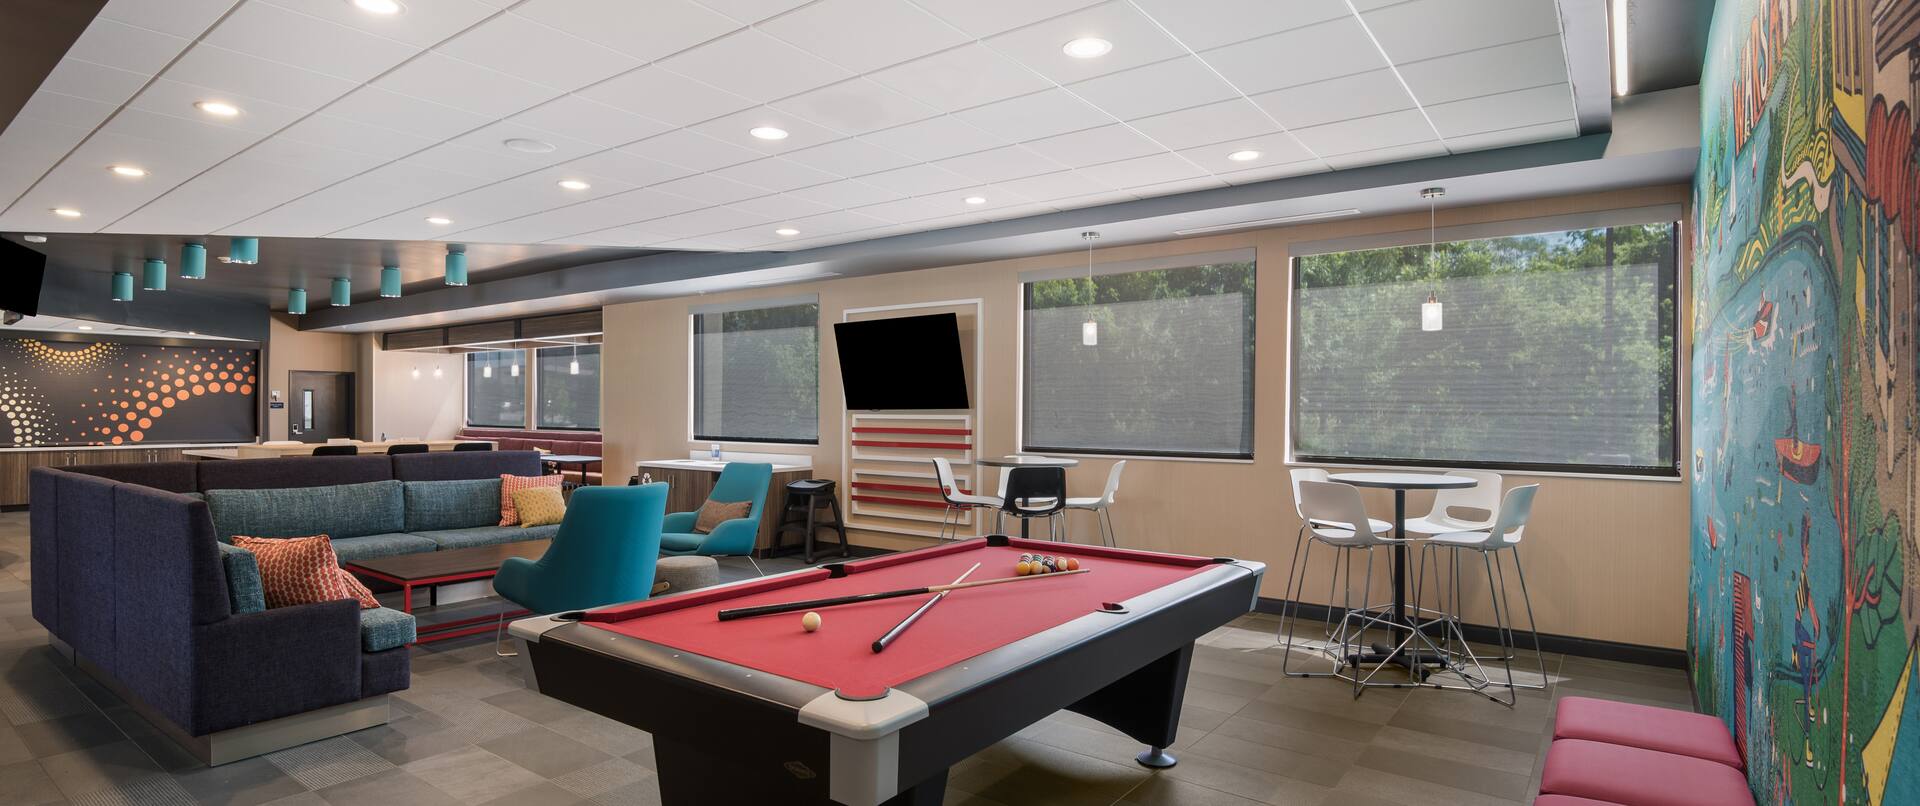 Lounge Area with Pool Table